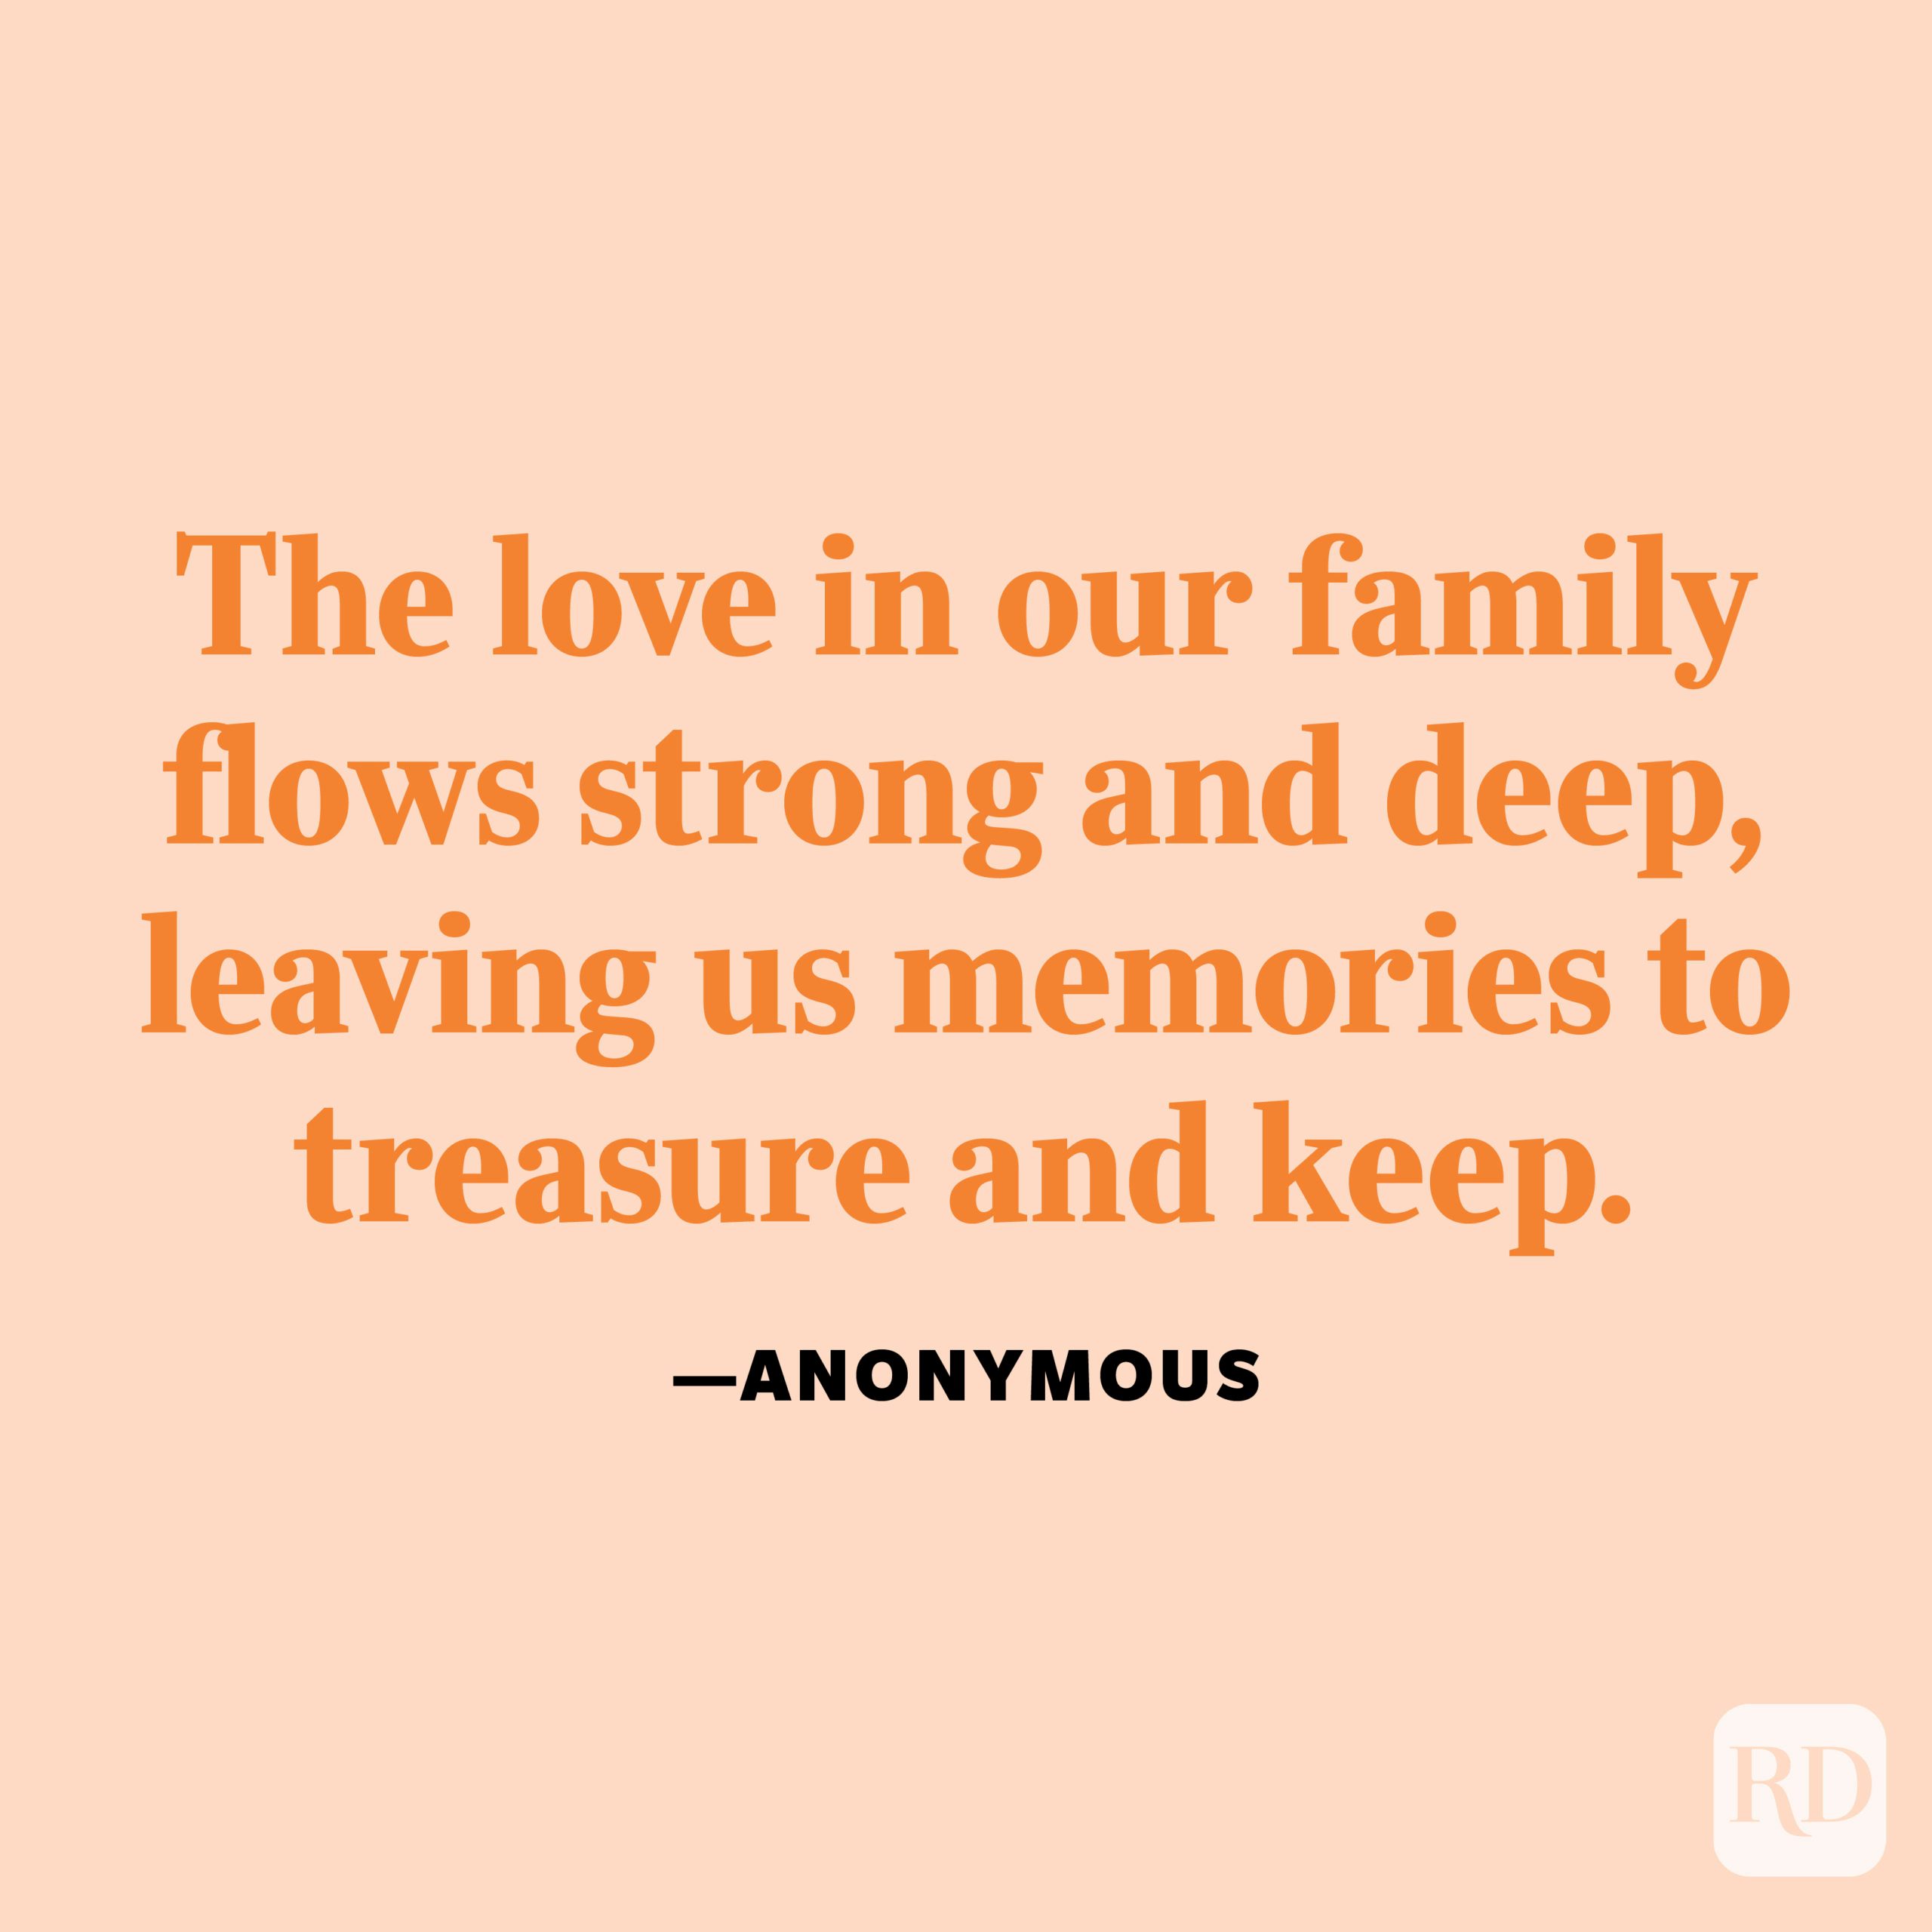 "The love in our family flows strong and deep, leaving us memories to treasure and keep." —Anonymous